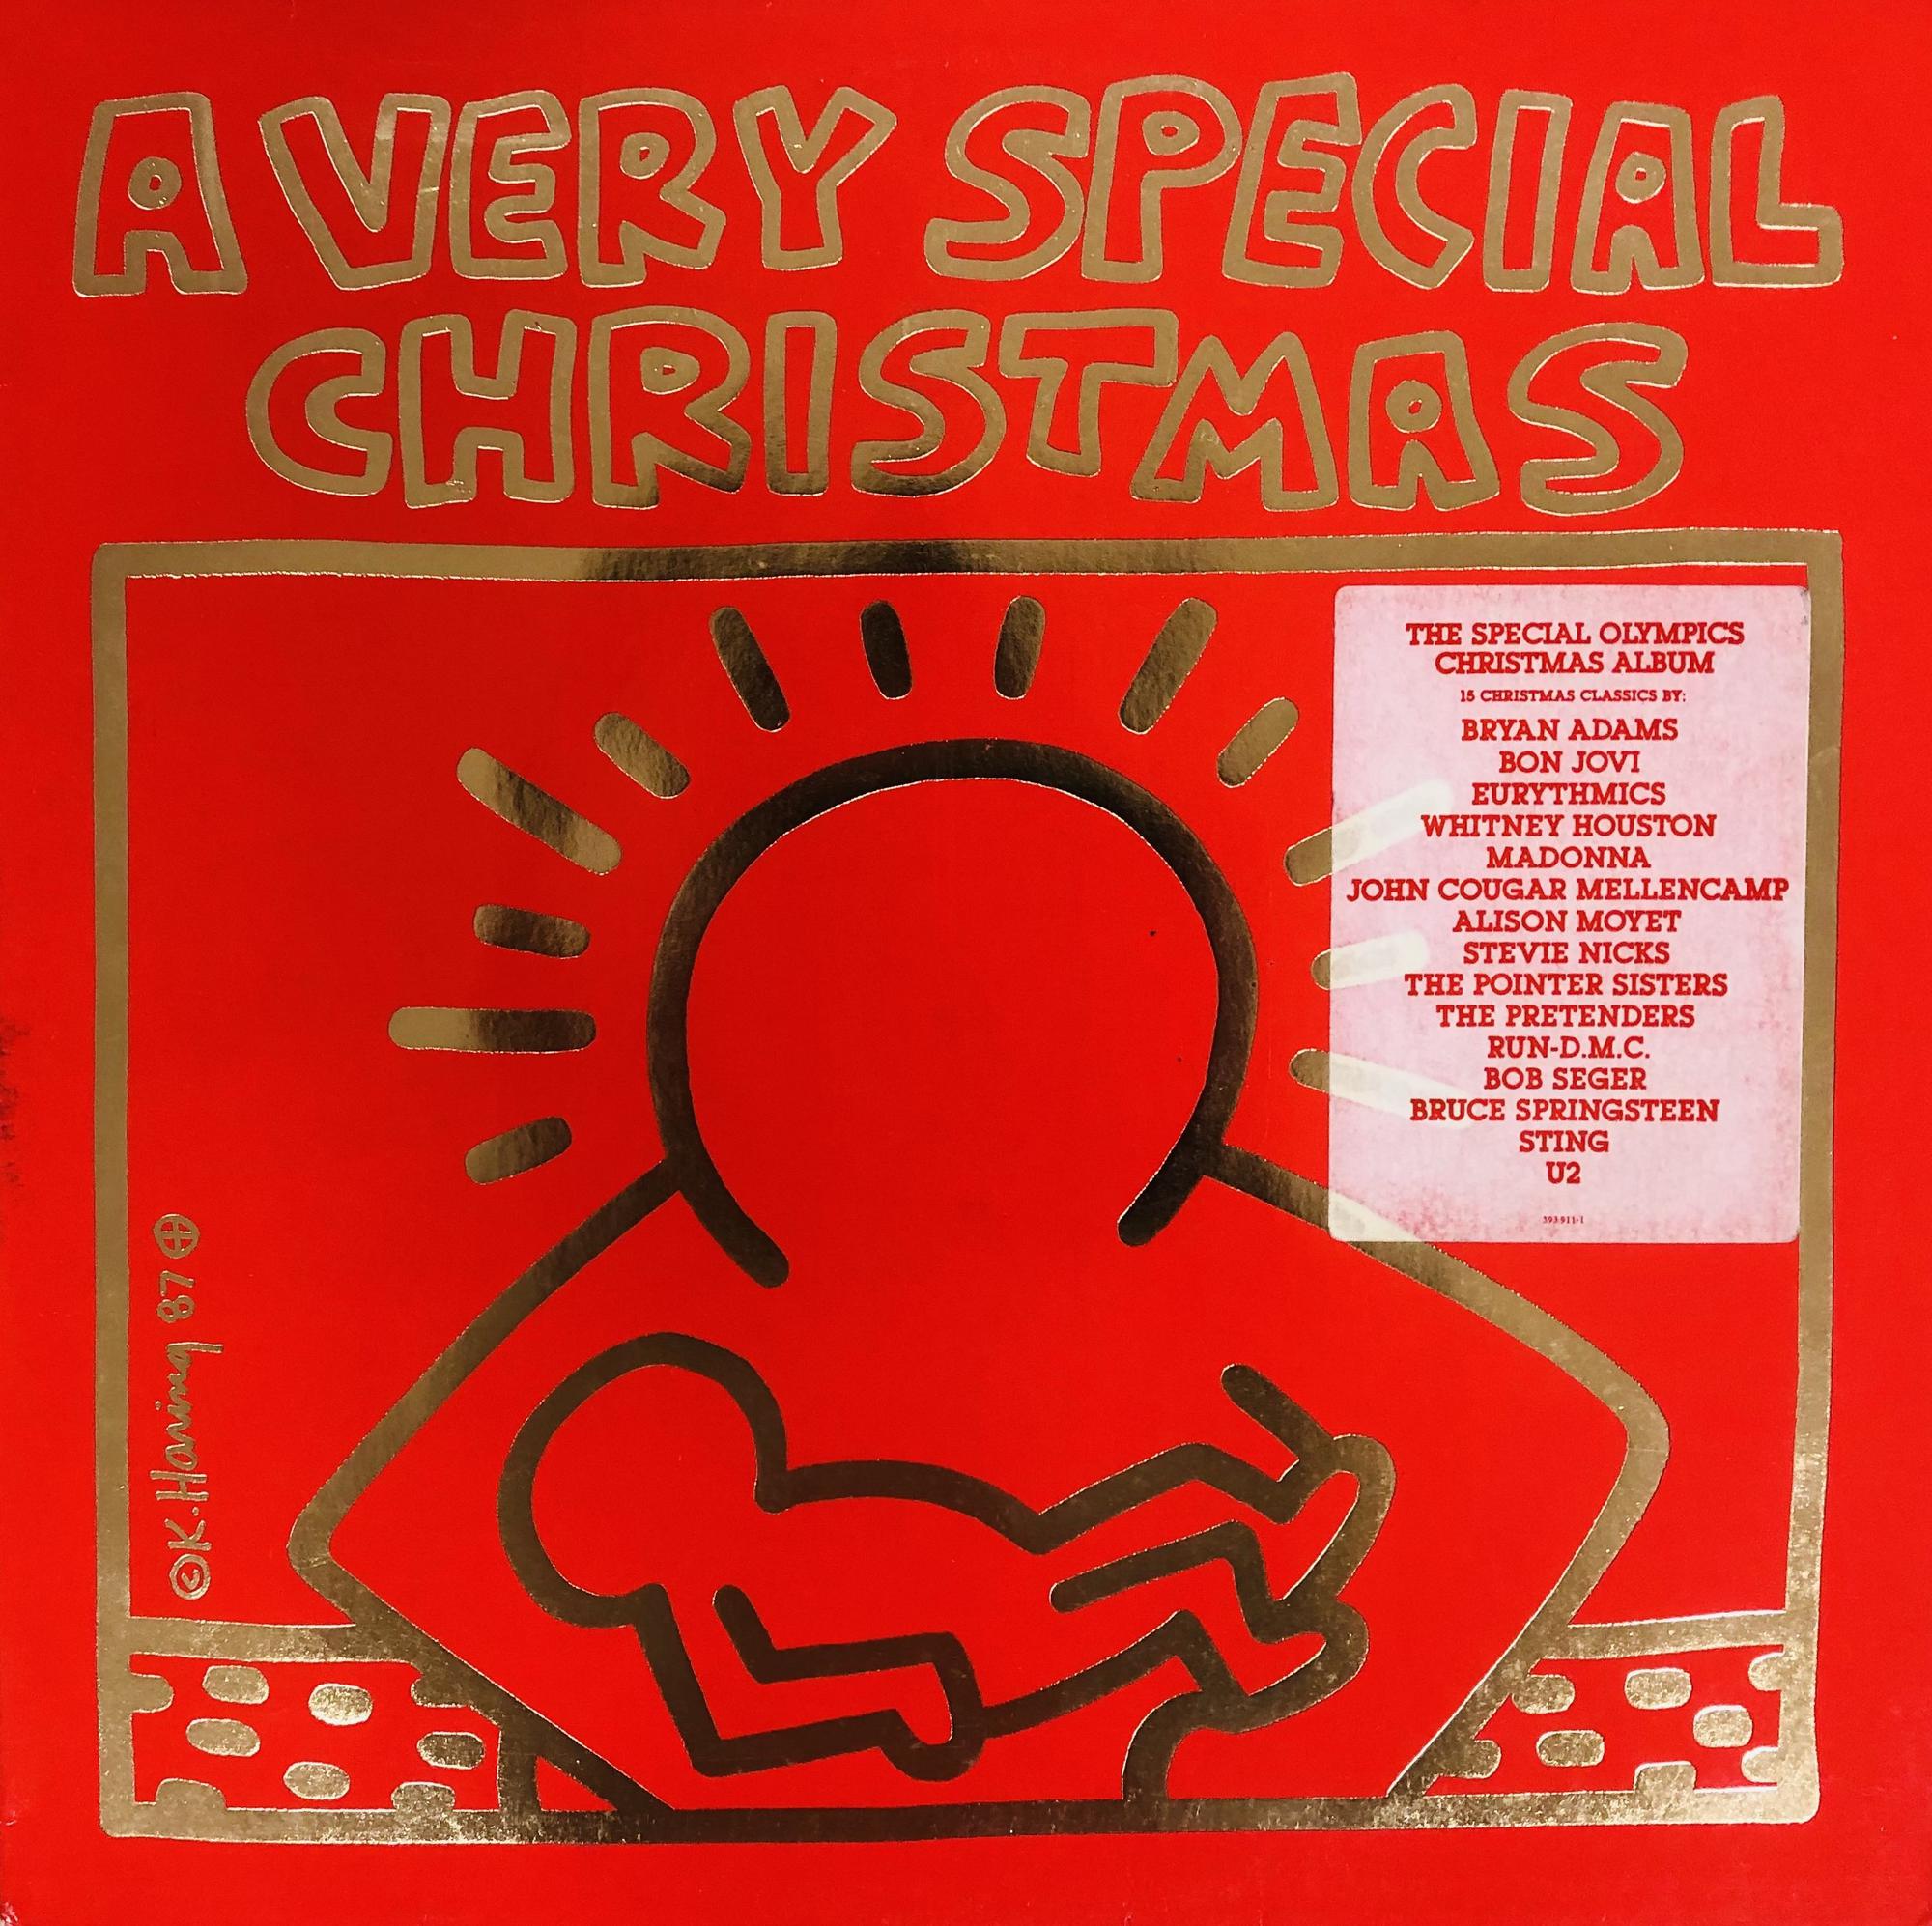 Keith Haring A VERY SPECIAL CHRISTMAS stampa offset sulla copertina del...